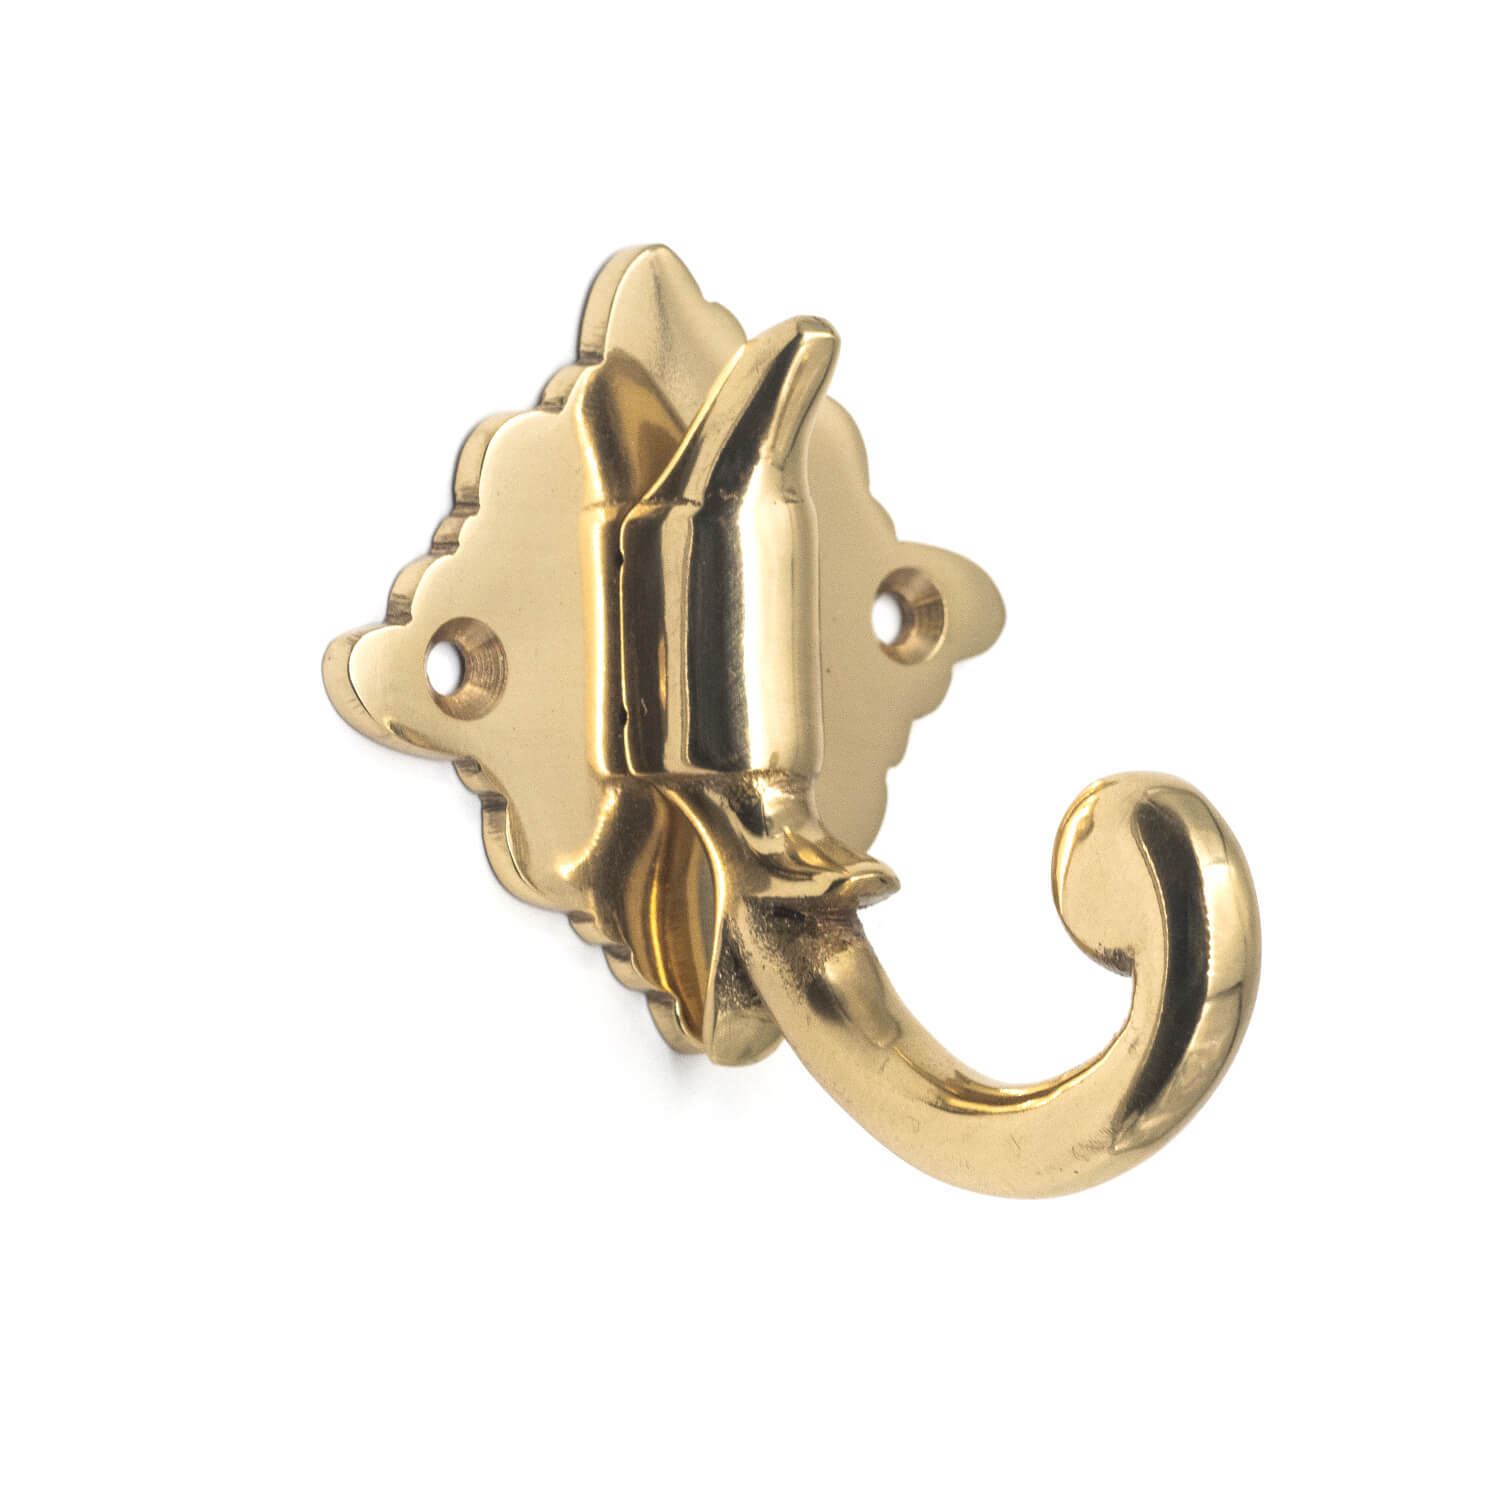 Coat hook - Almue - Brass with lacquer - Model 6535 - Hooks